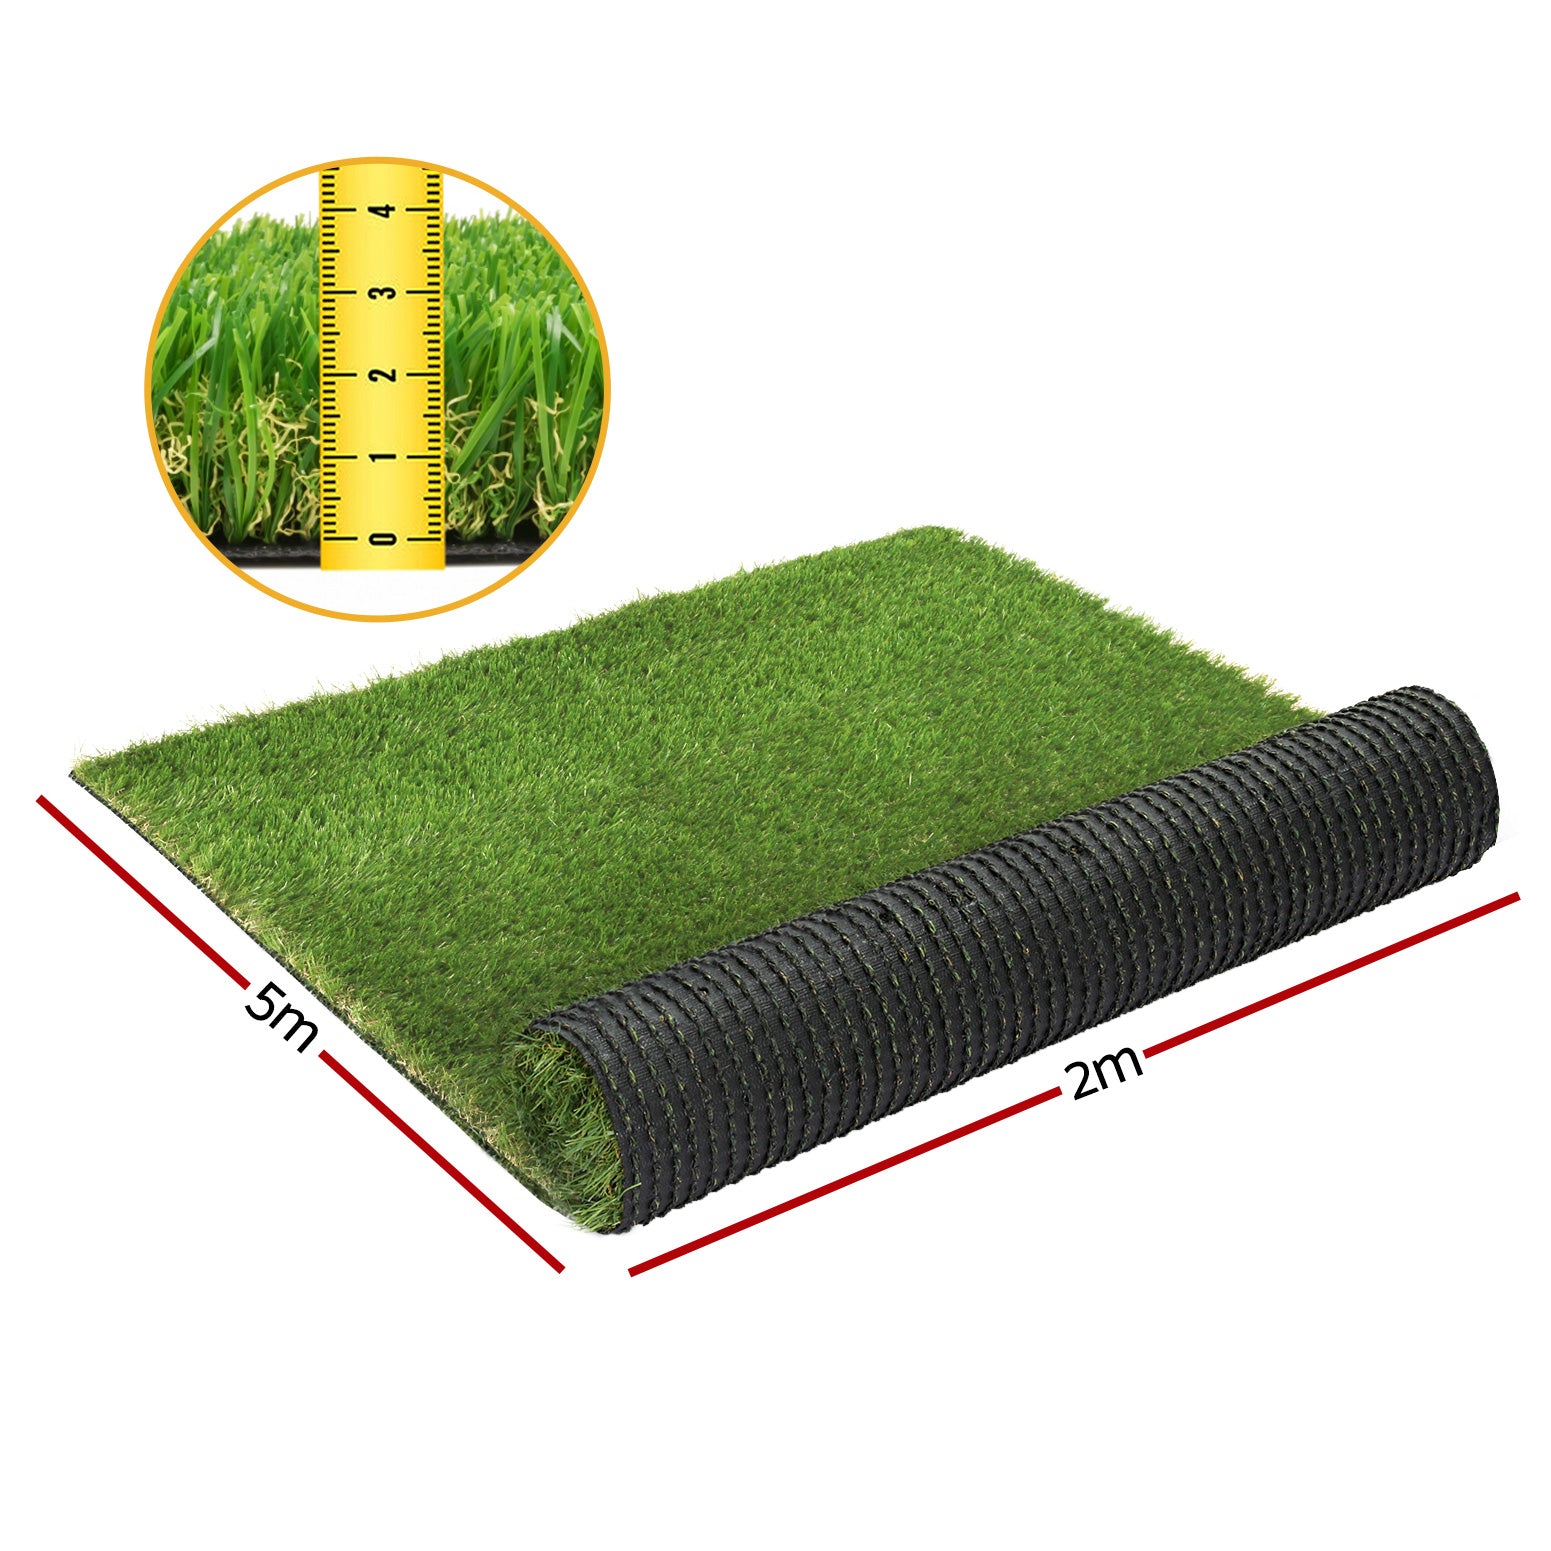 Artificial Grass 30mm 2mx5m 20SQM Synthetic Fake Lawn Turf Plastic Plant 4-coloured